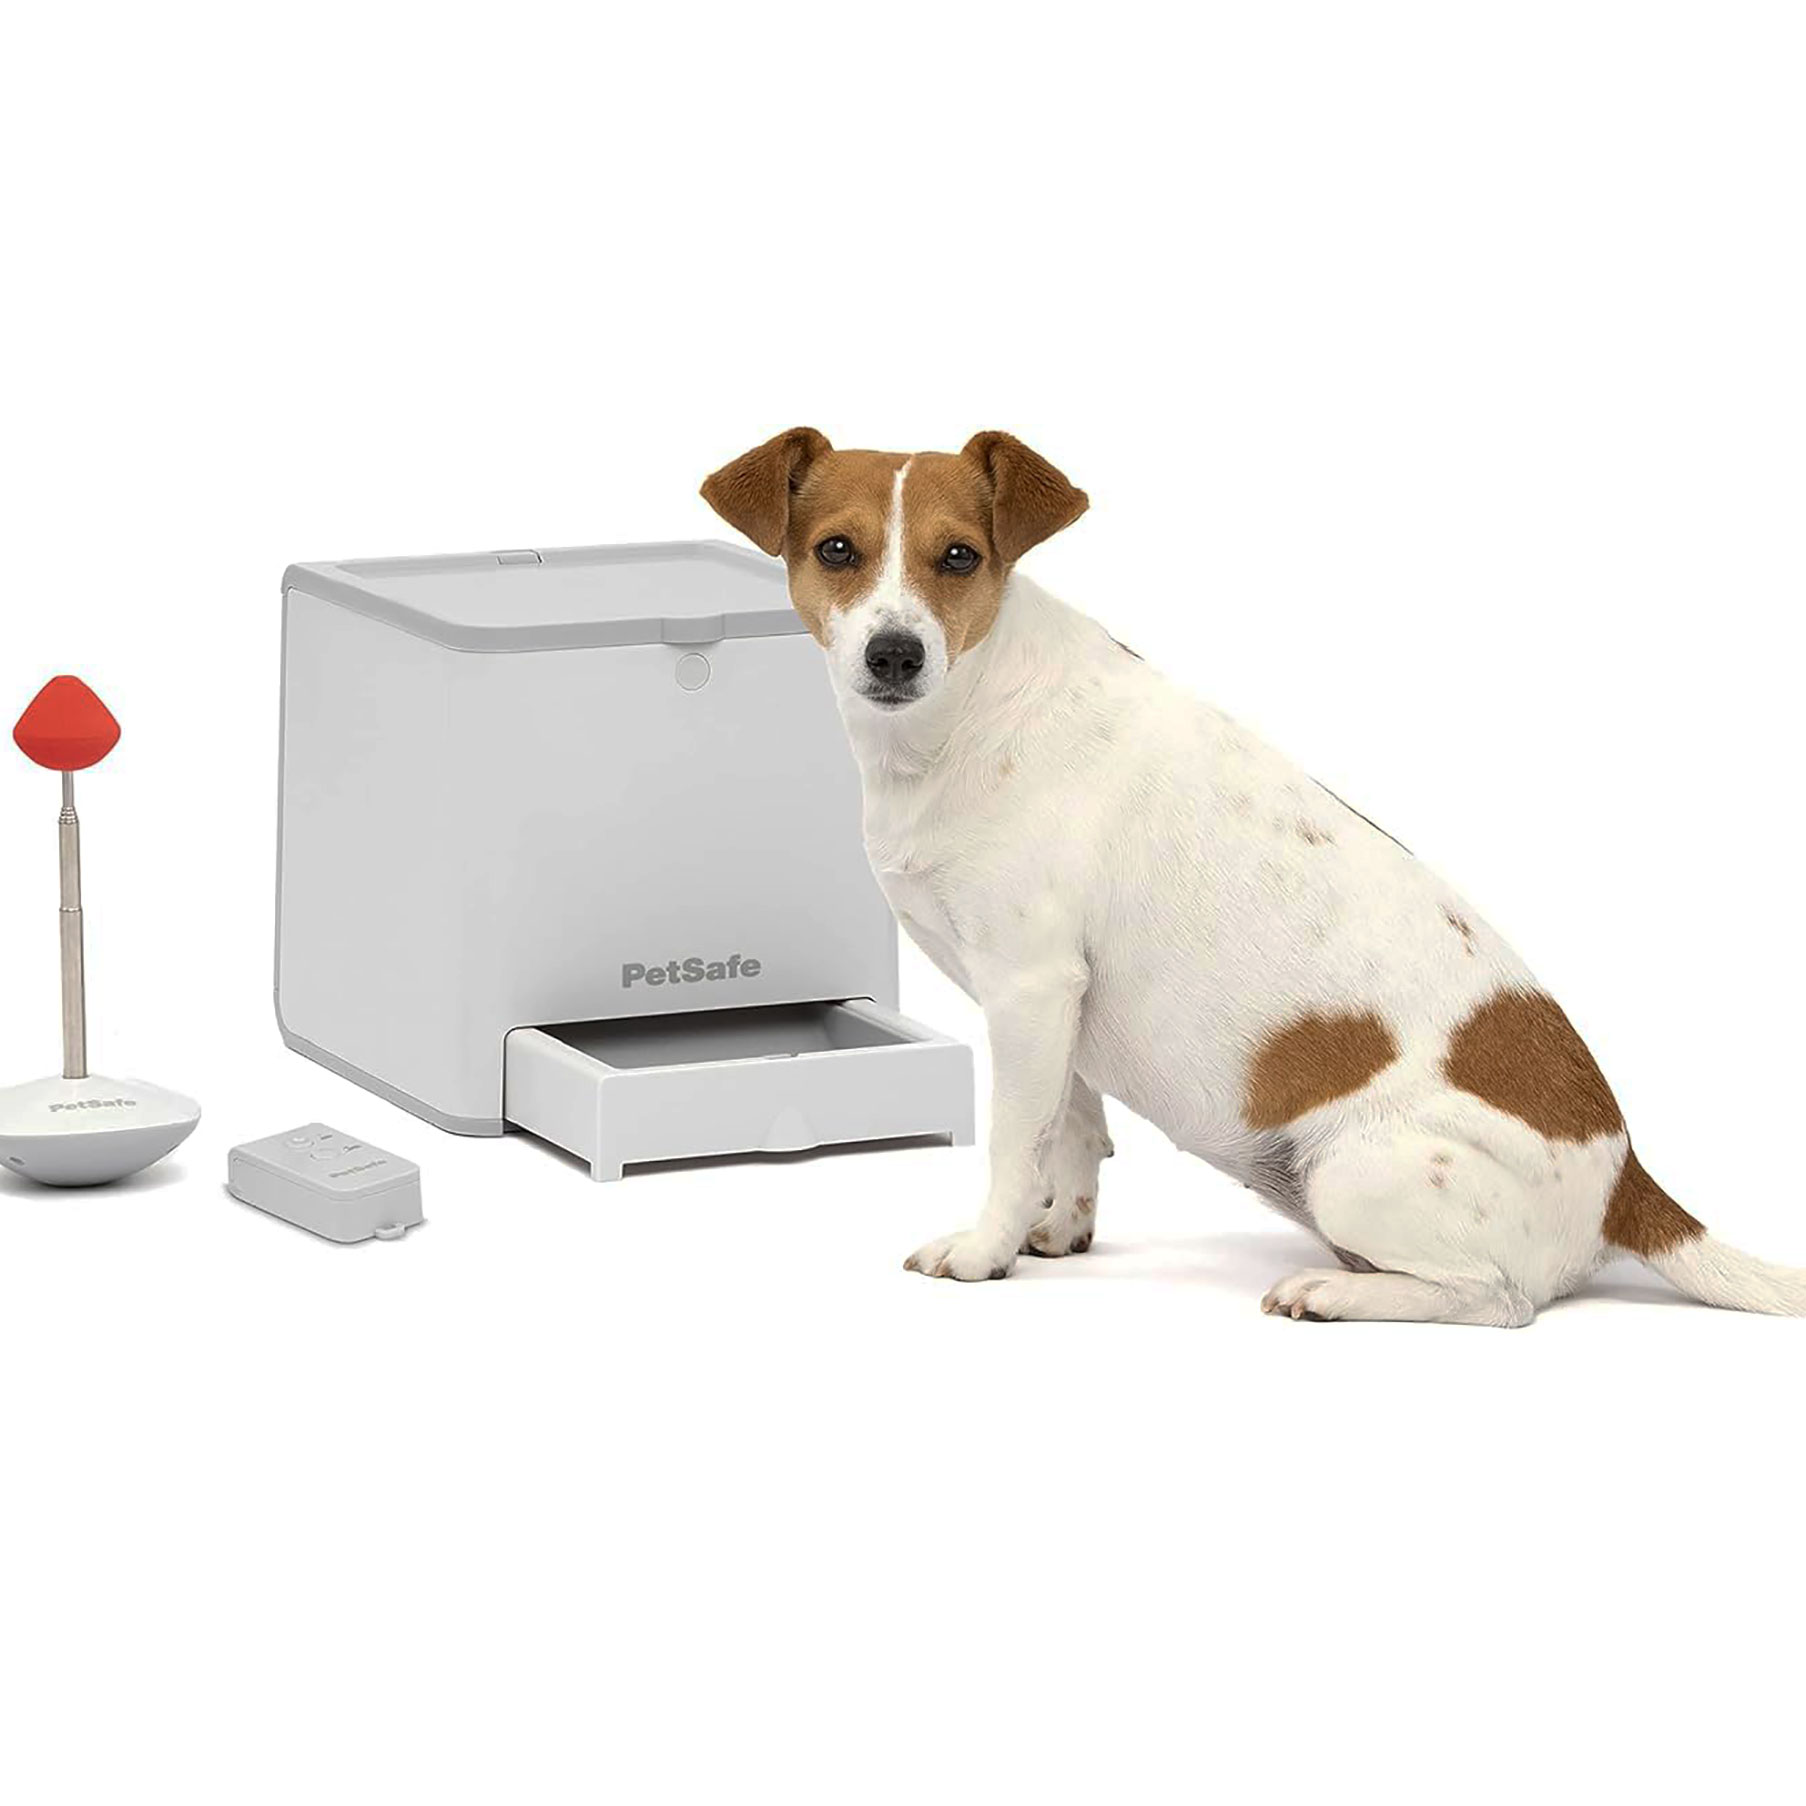 Great training tool that allow you to use a remote to provide a treat when your dog deserves it.